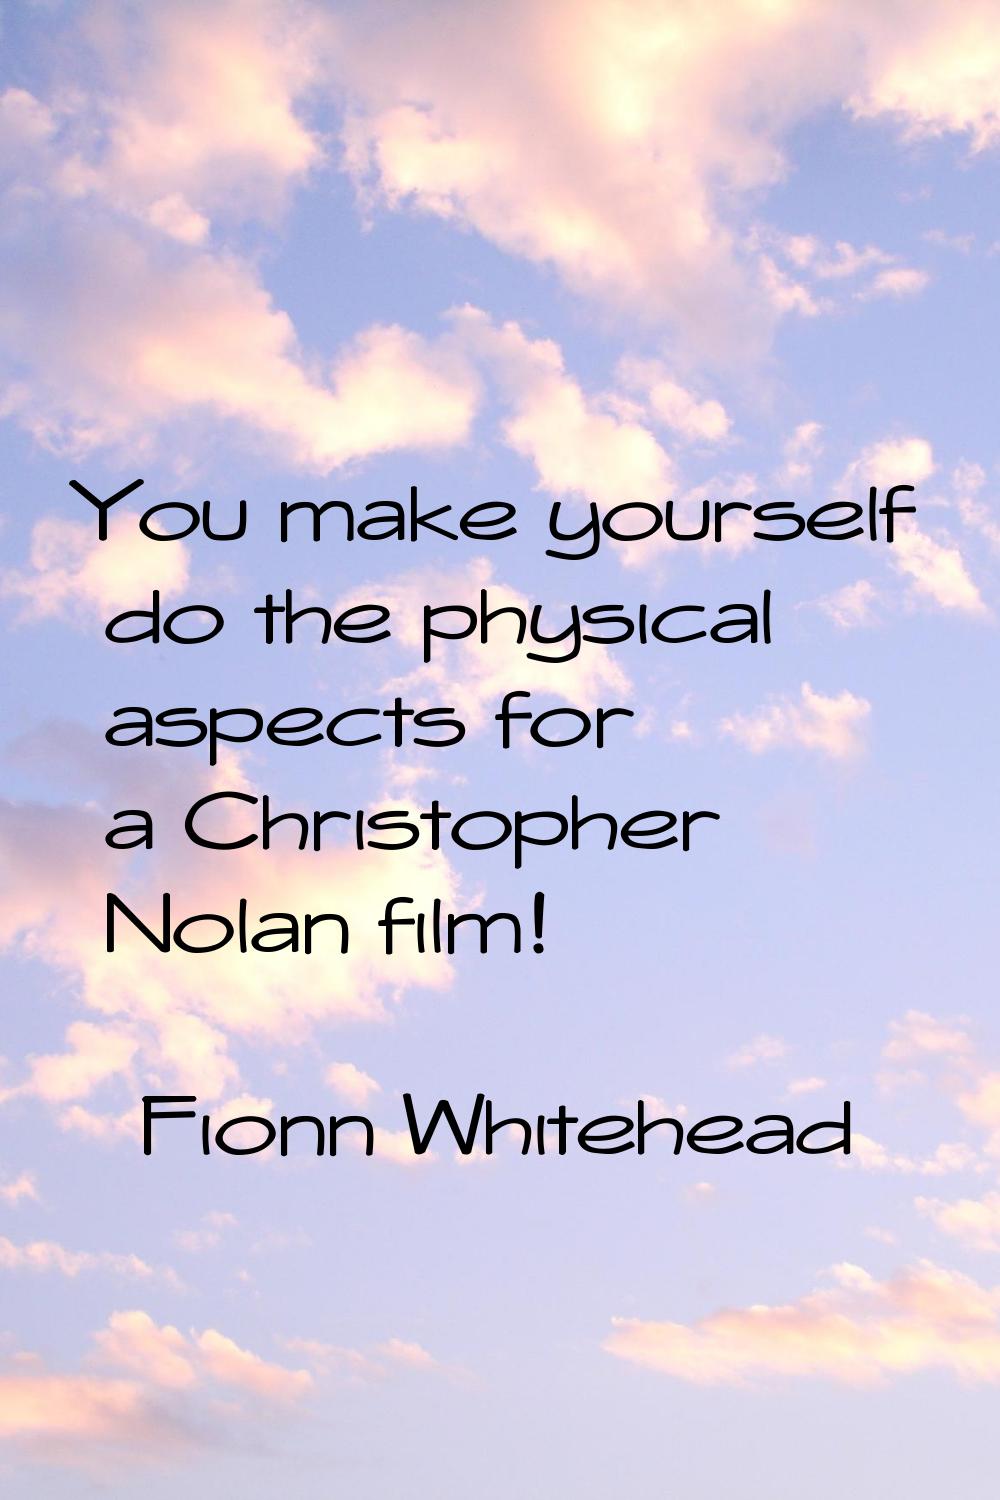 You make yourself do the physical aspects for a Christopher Nolan film!